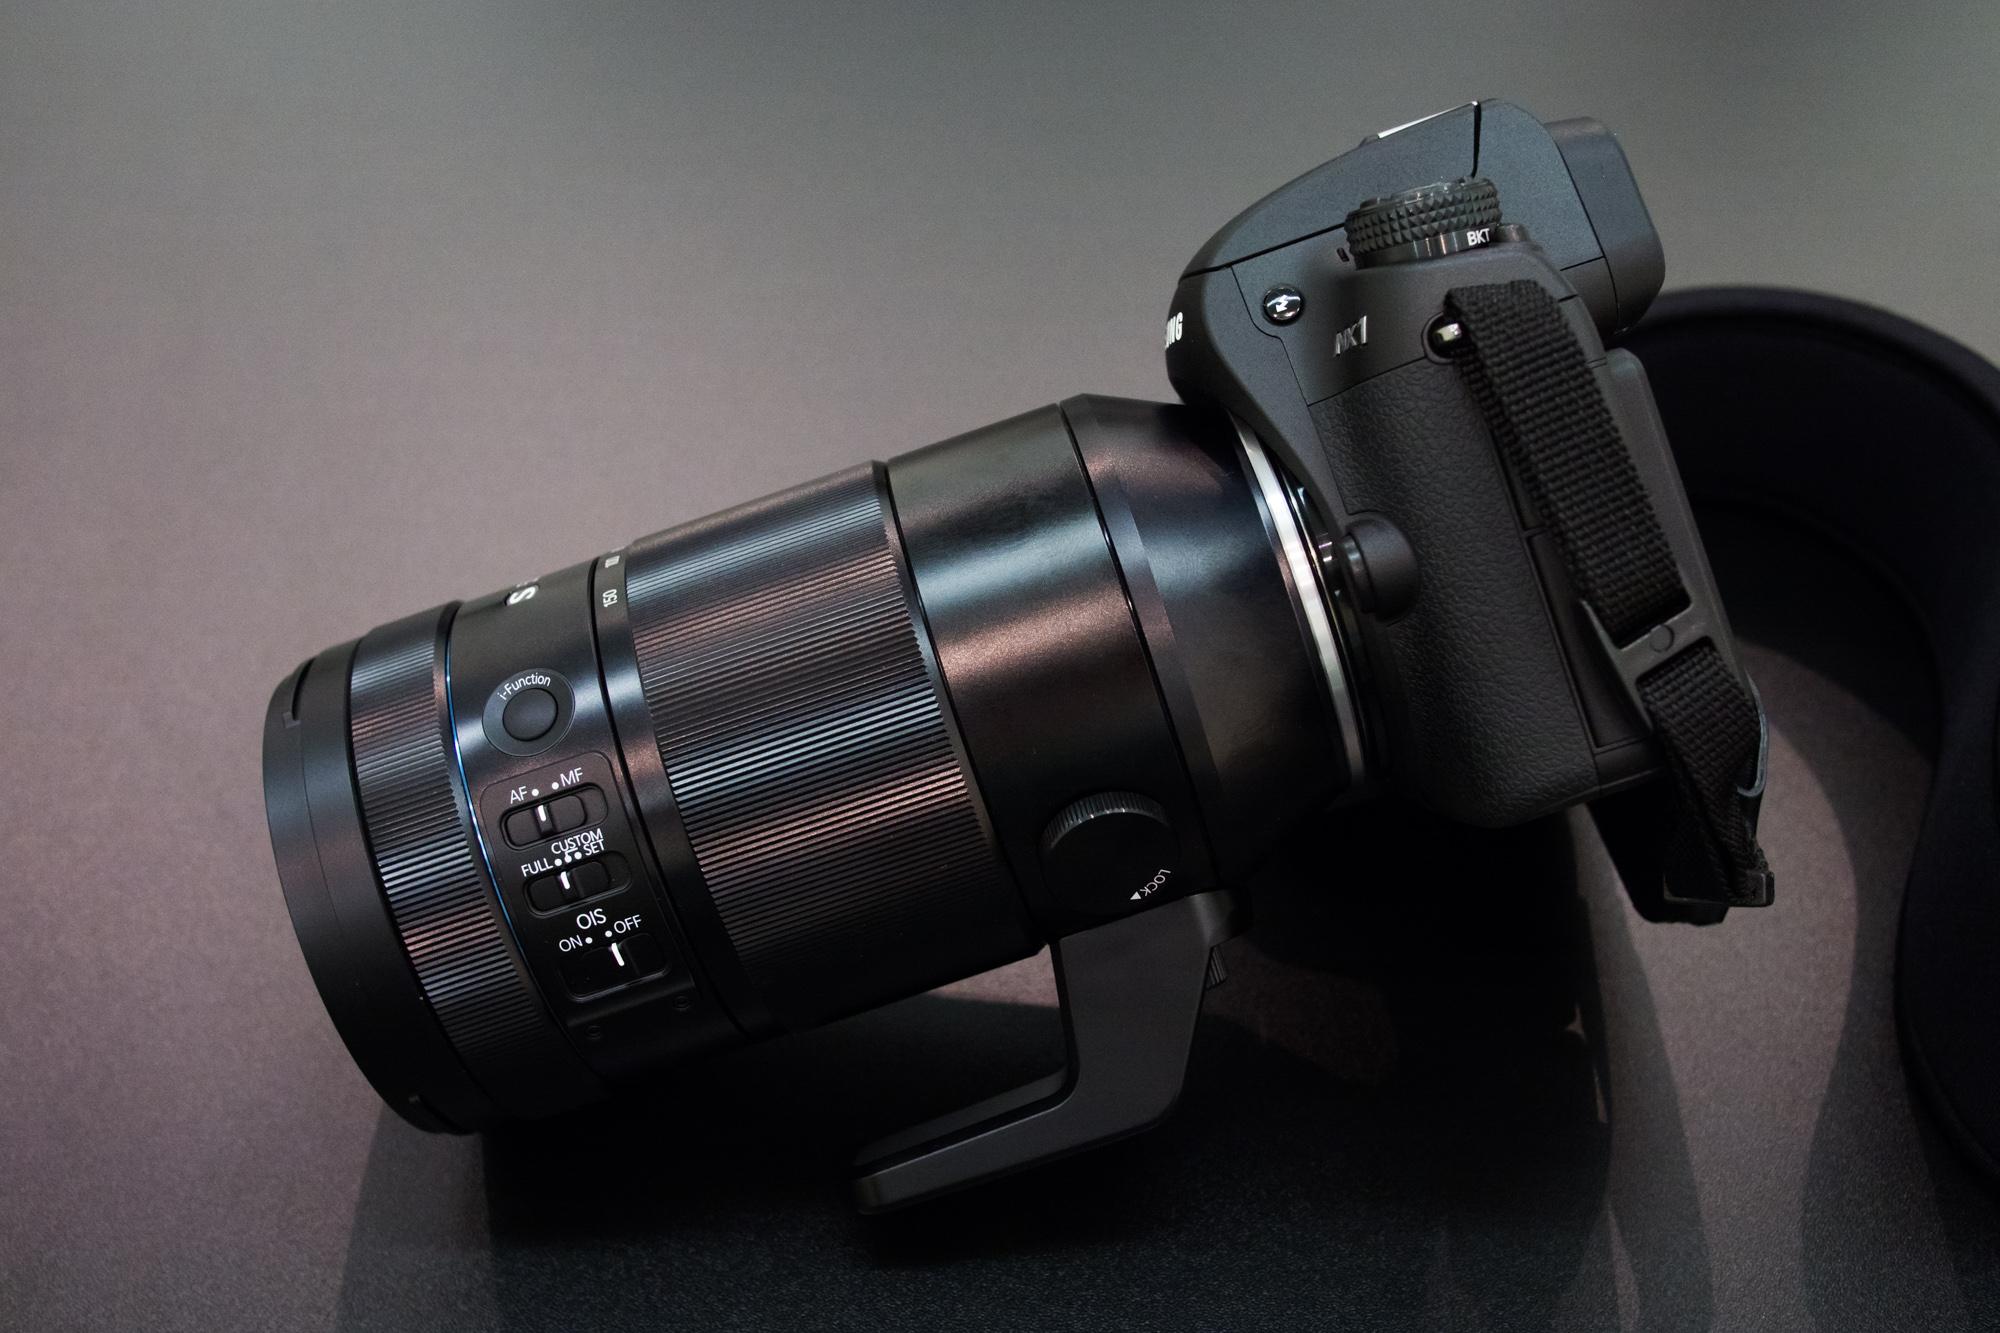 samsungs nx1 4k shooting beast puts mirrorless competition shame samsung with 50 150 side